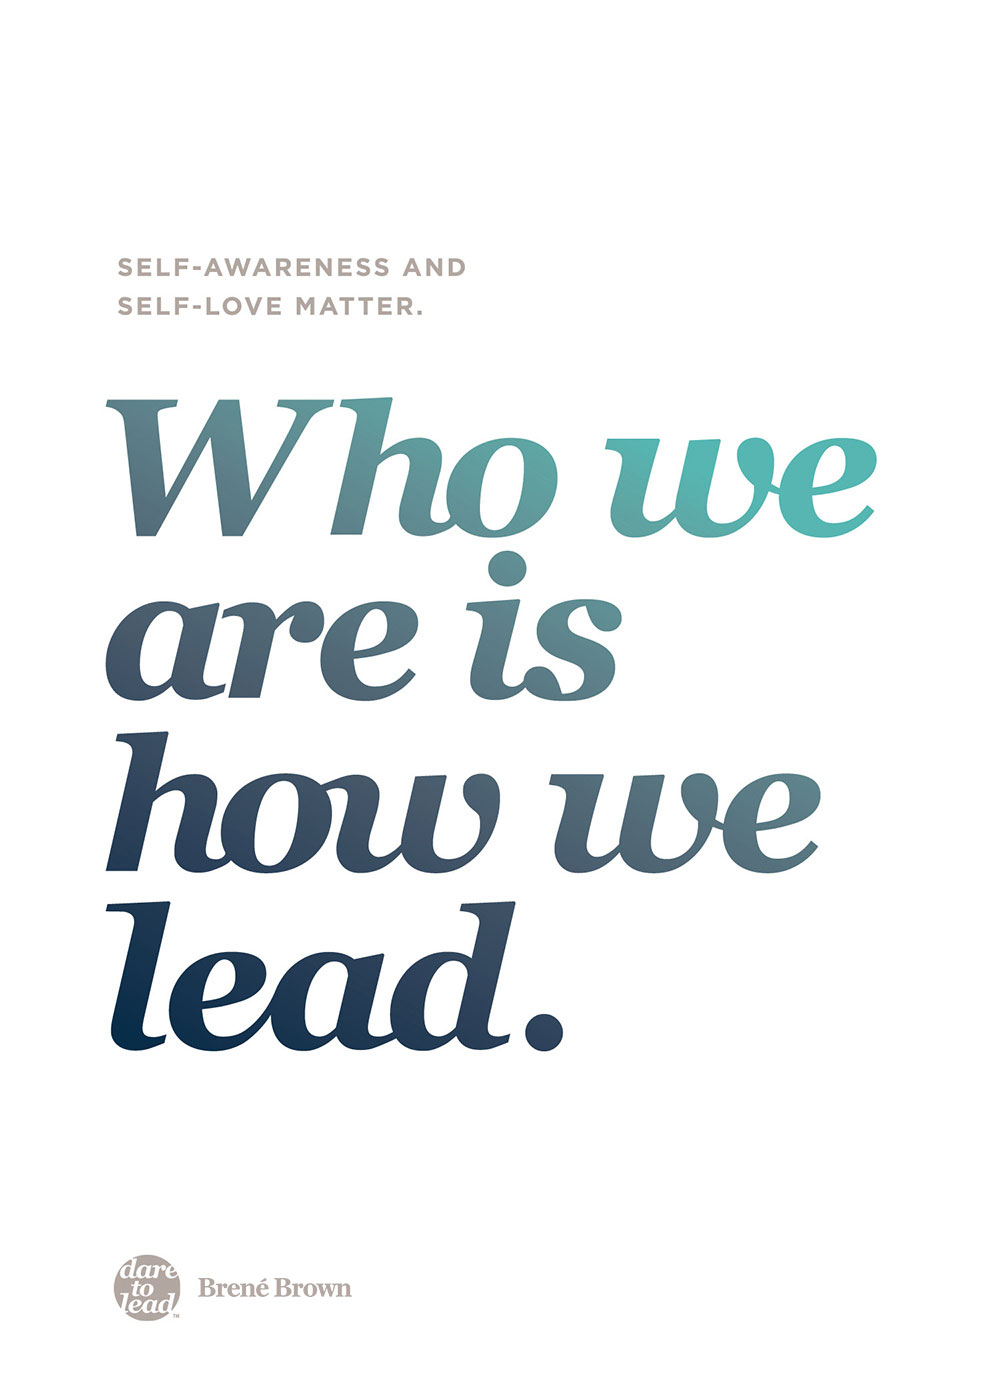 Self-awareness and self-love matter. Who we are is how we lead. - Brené Brown